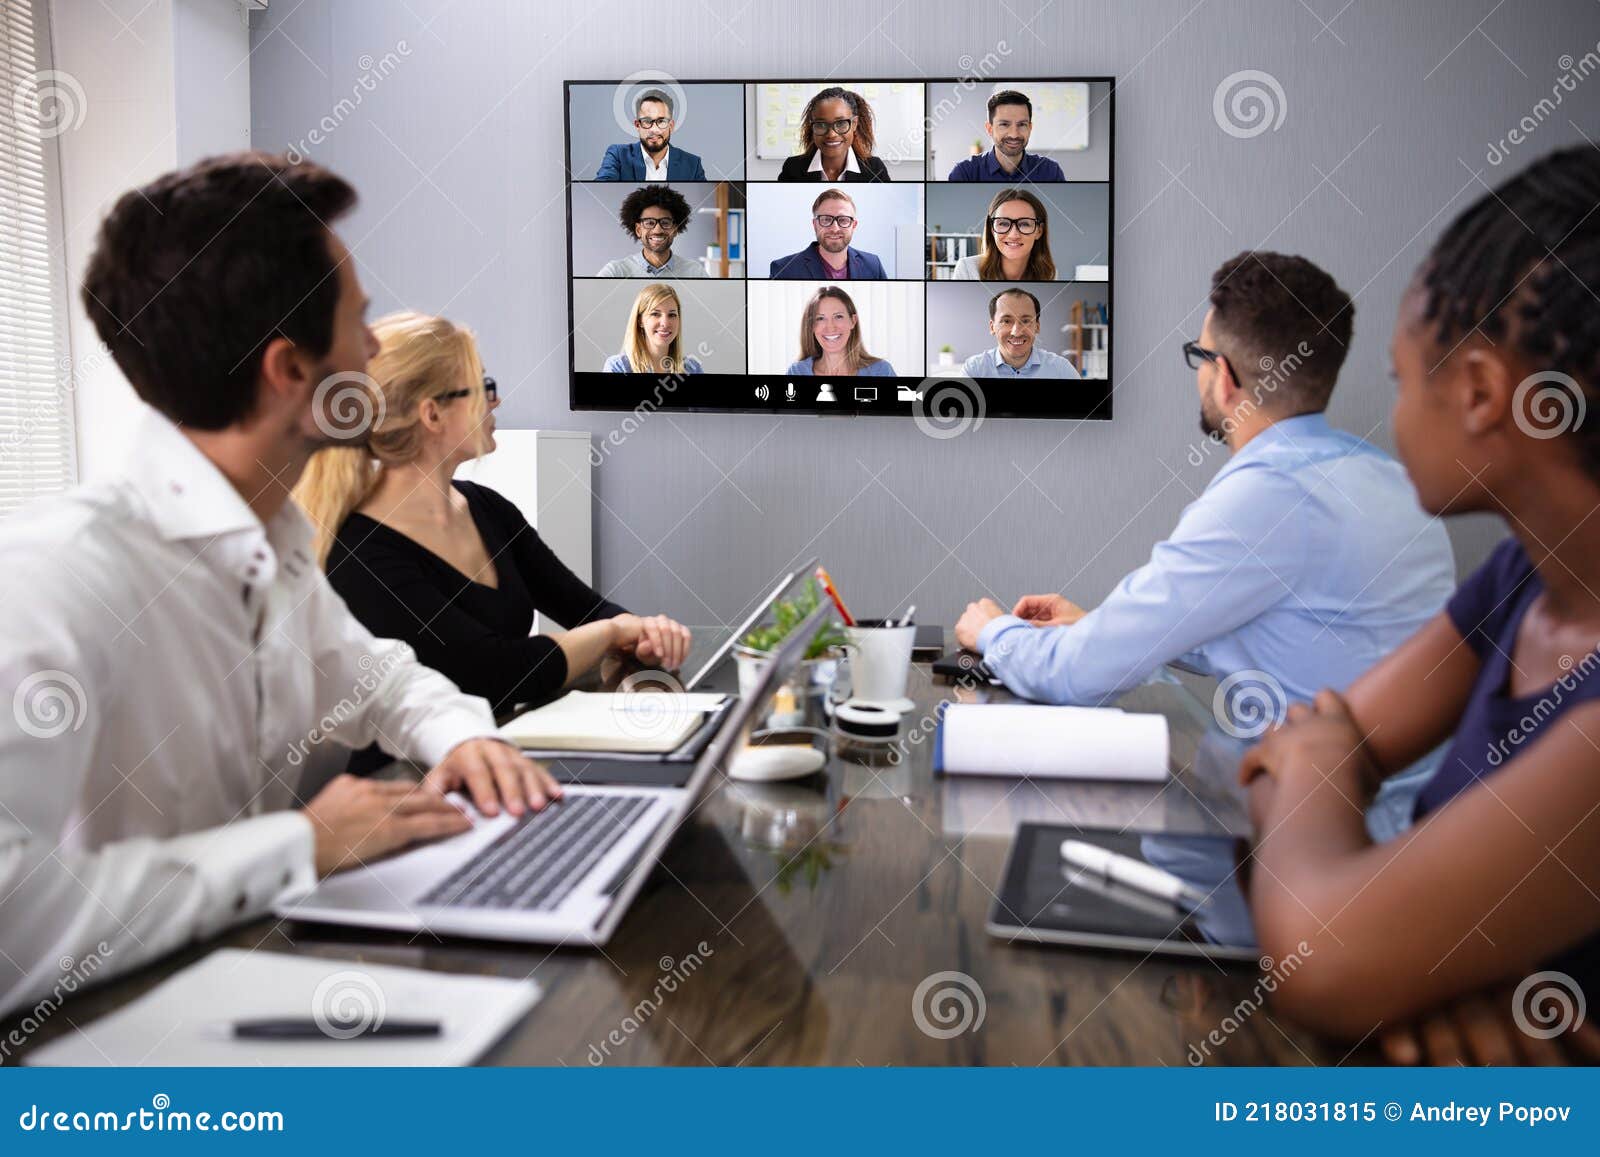 business video conference call